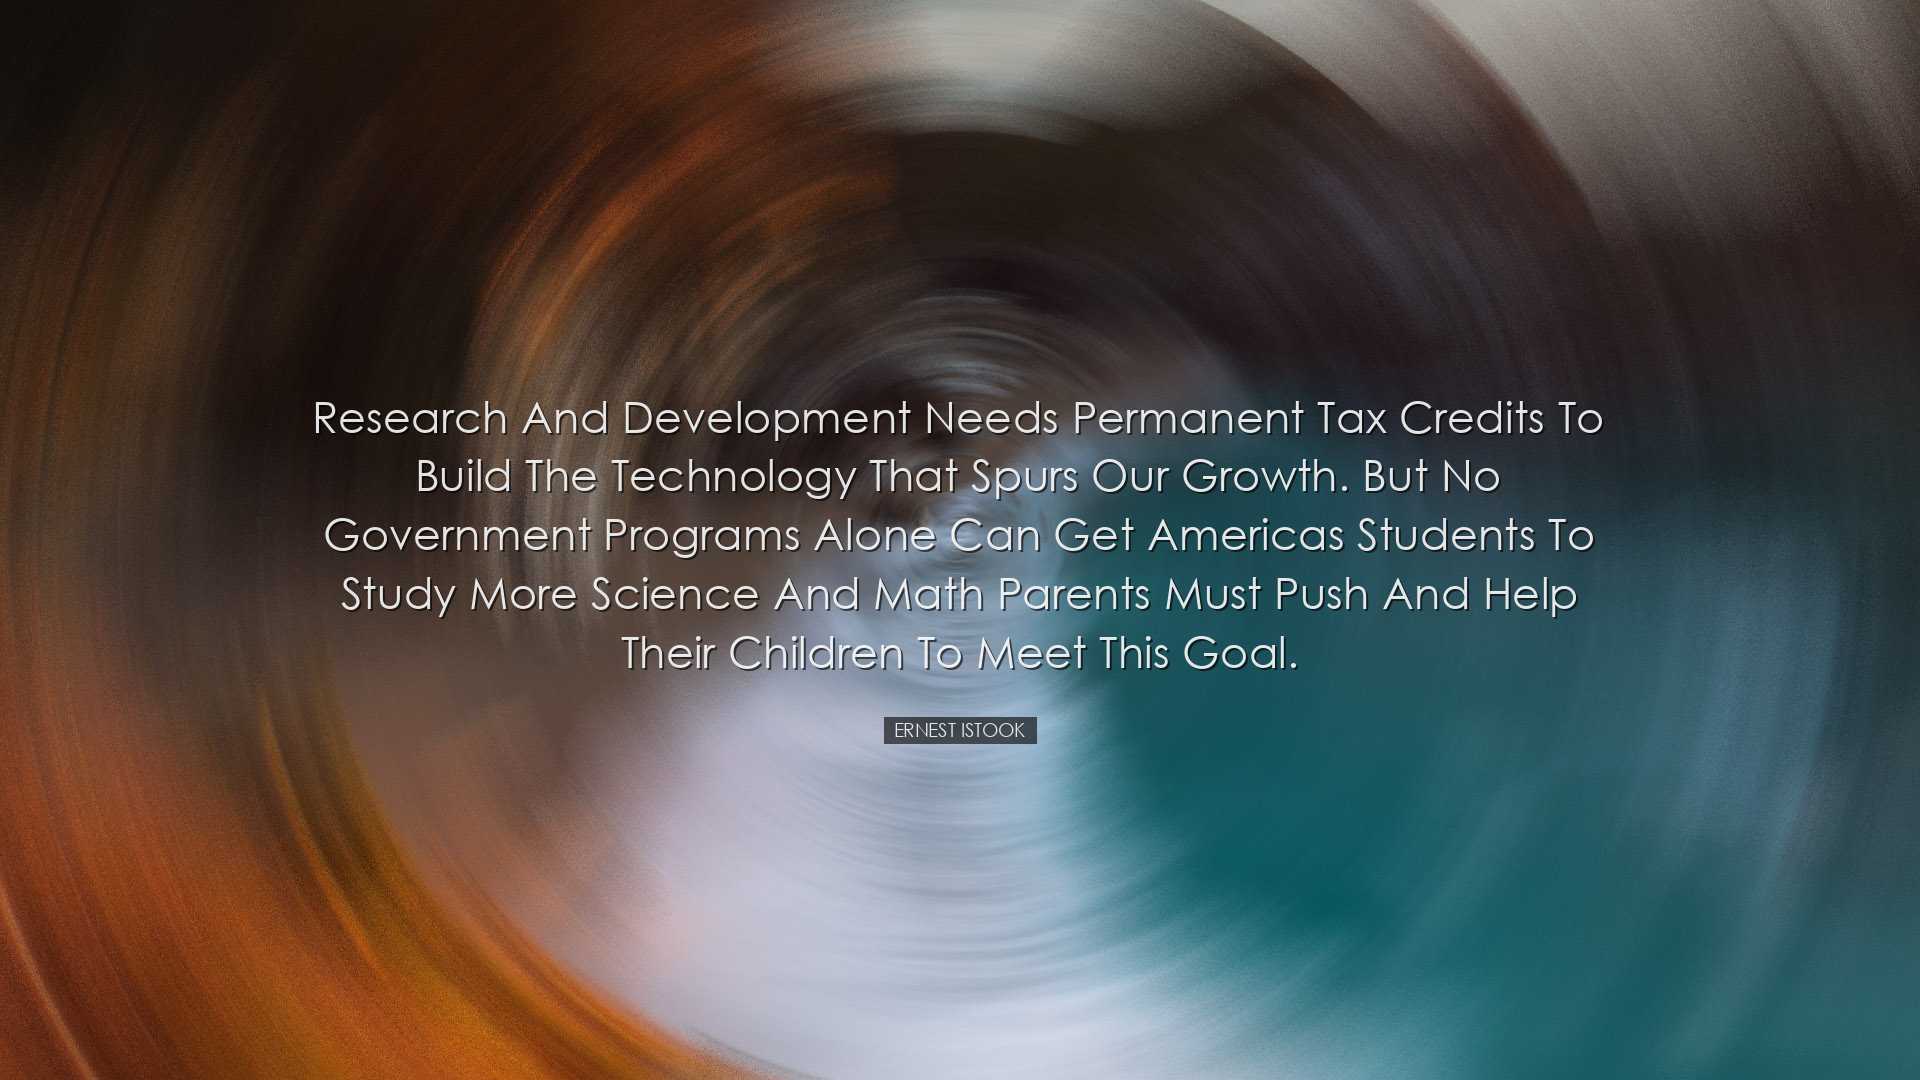 Research and development needs permanent tax credits to build the